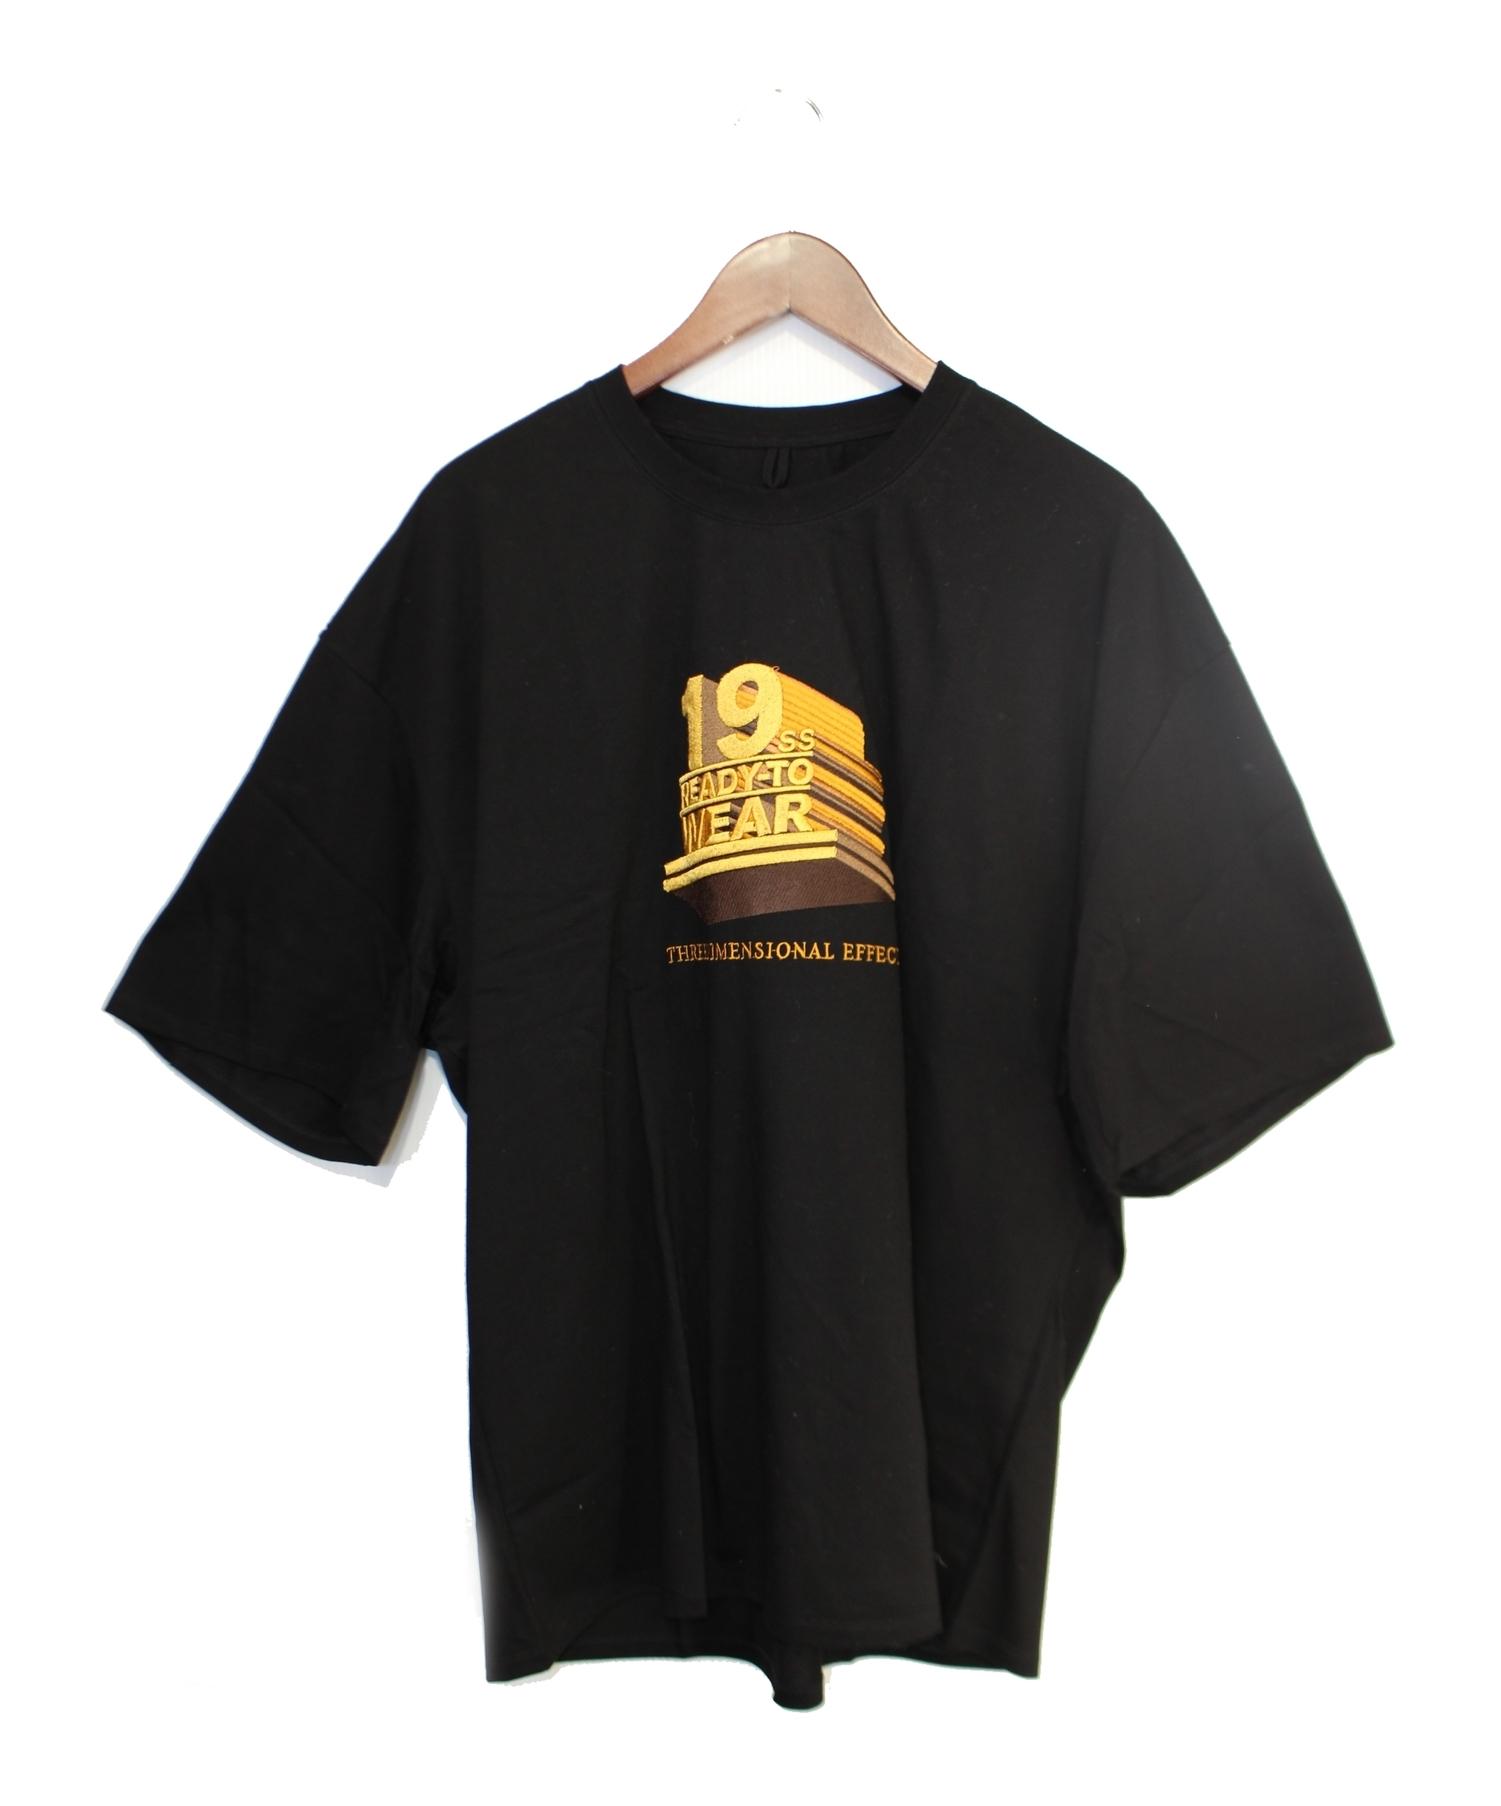 doublet (ダブレット) 19SS 3D EMBROIDERY T-SHIRT ブラック サイズ:XL